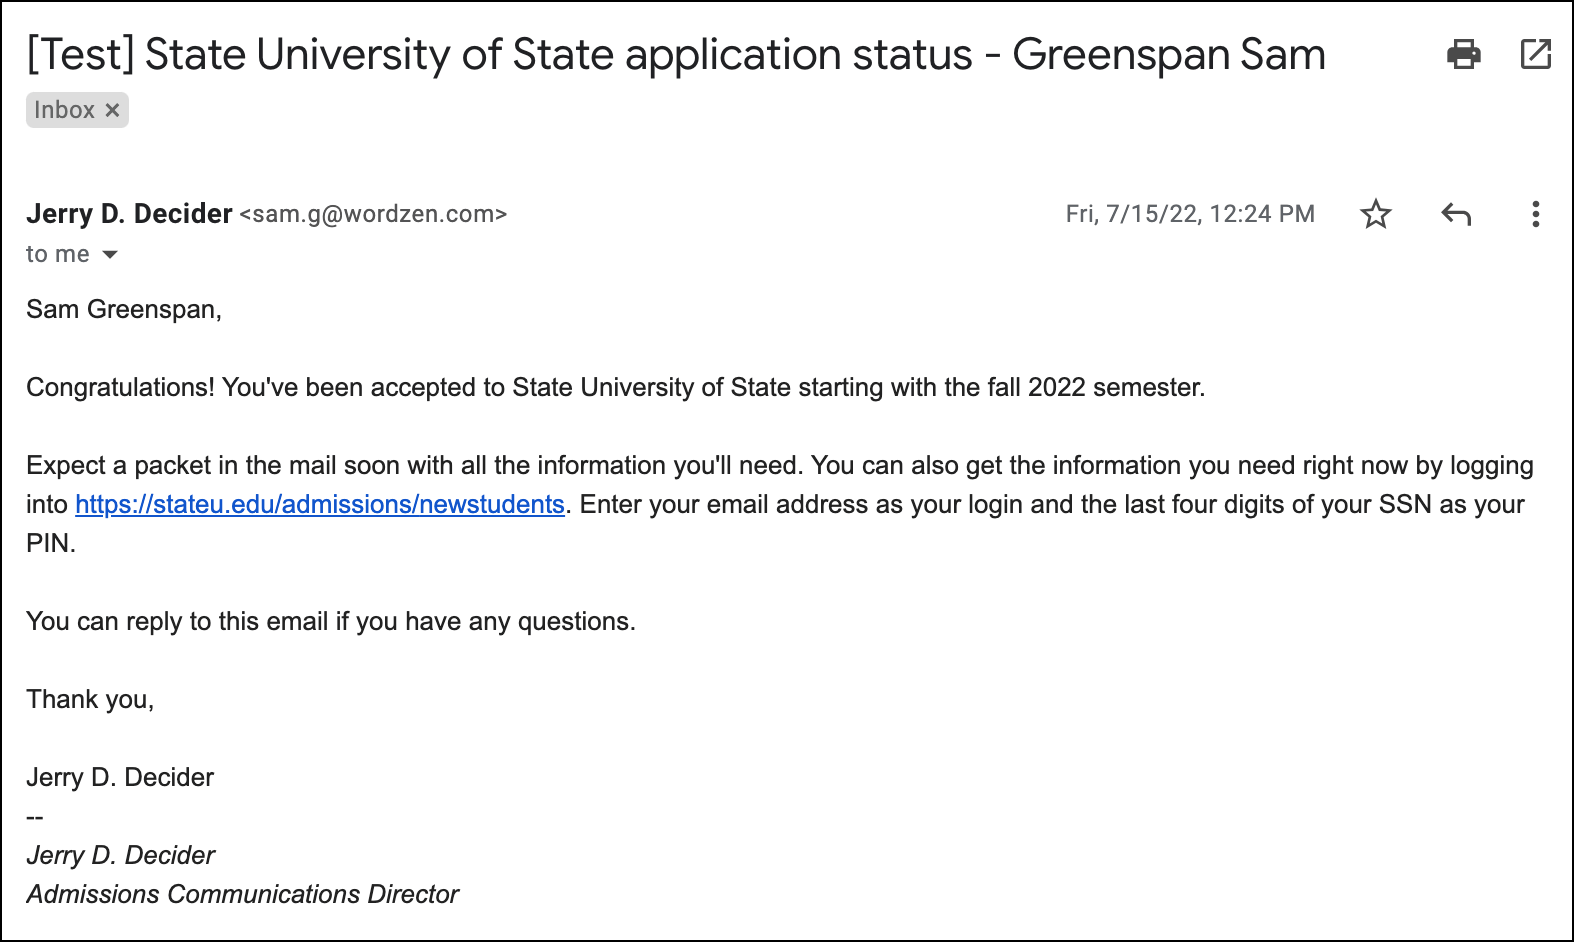 Testing the acceptance email